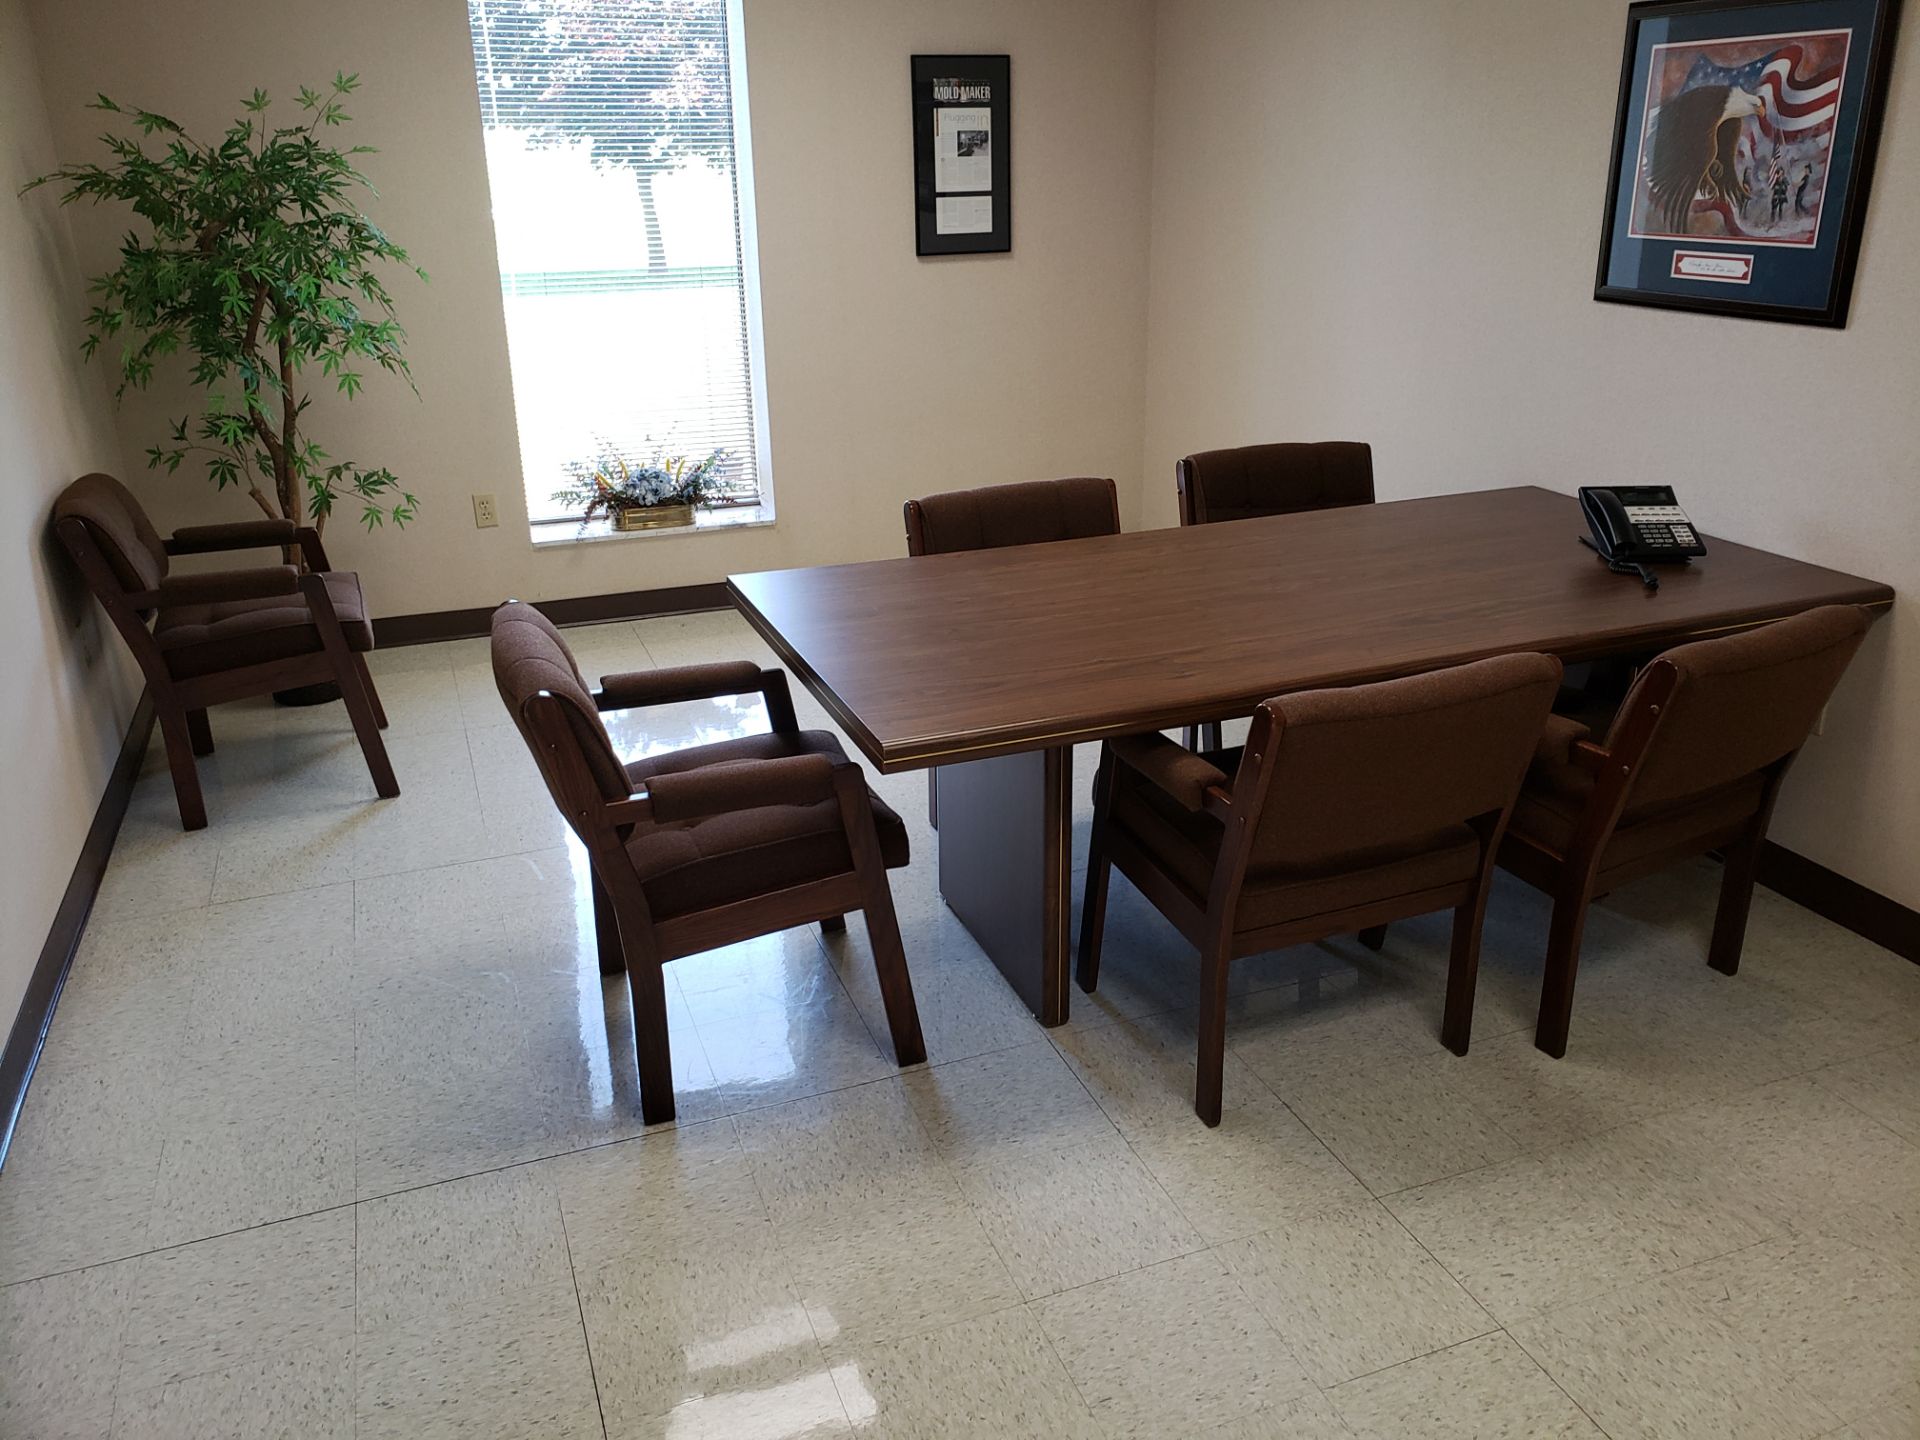 CONTENTS OF OFFICE: CONFERENCE TABLE; (6) CHAIRS; TV STAND W/ VCR/DVD PLAYER